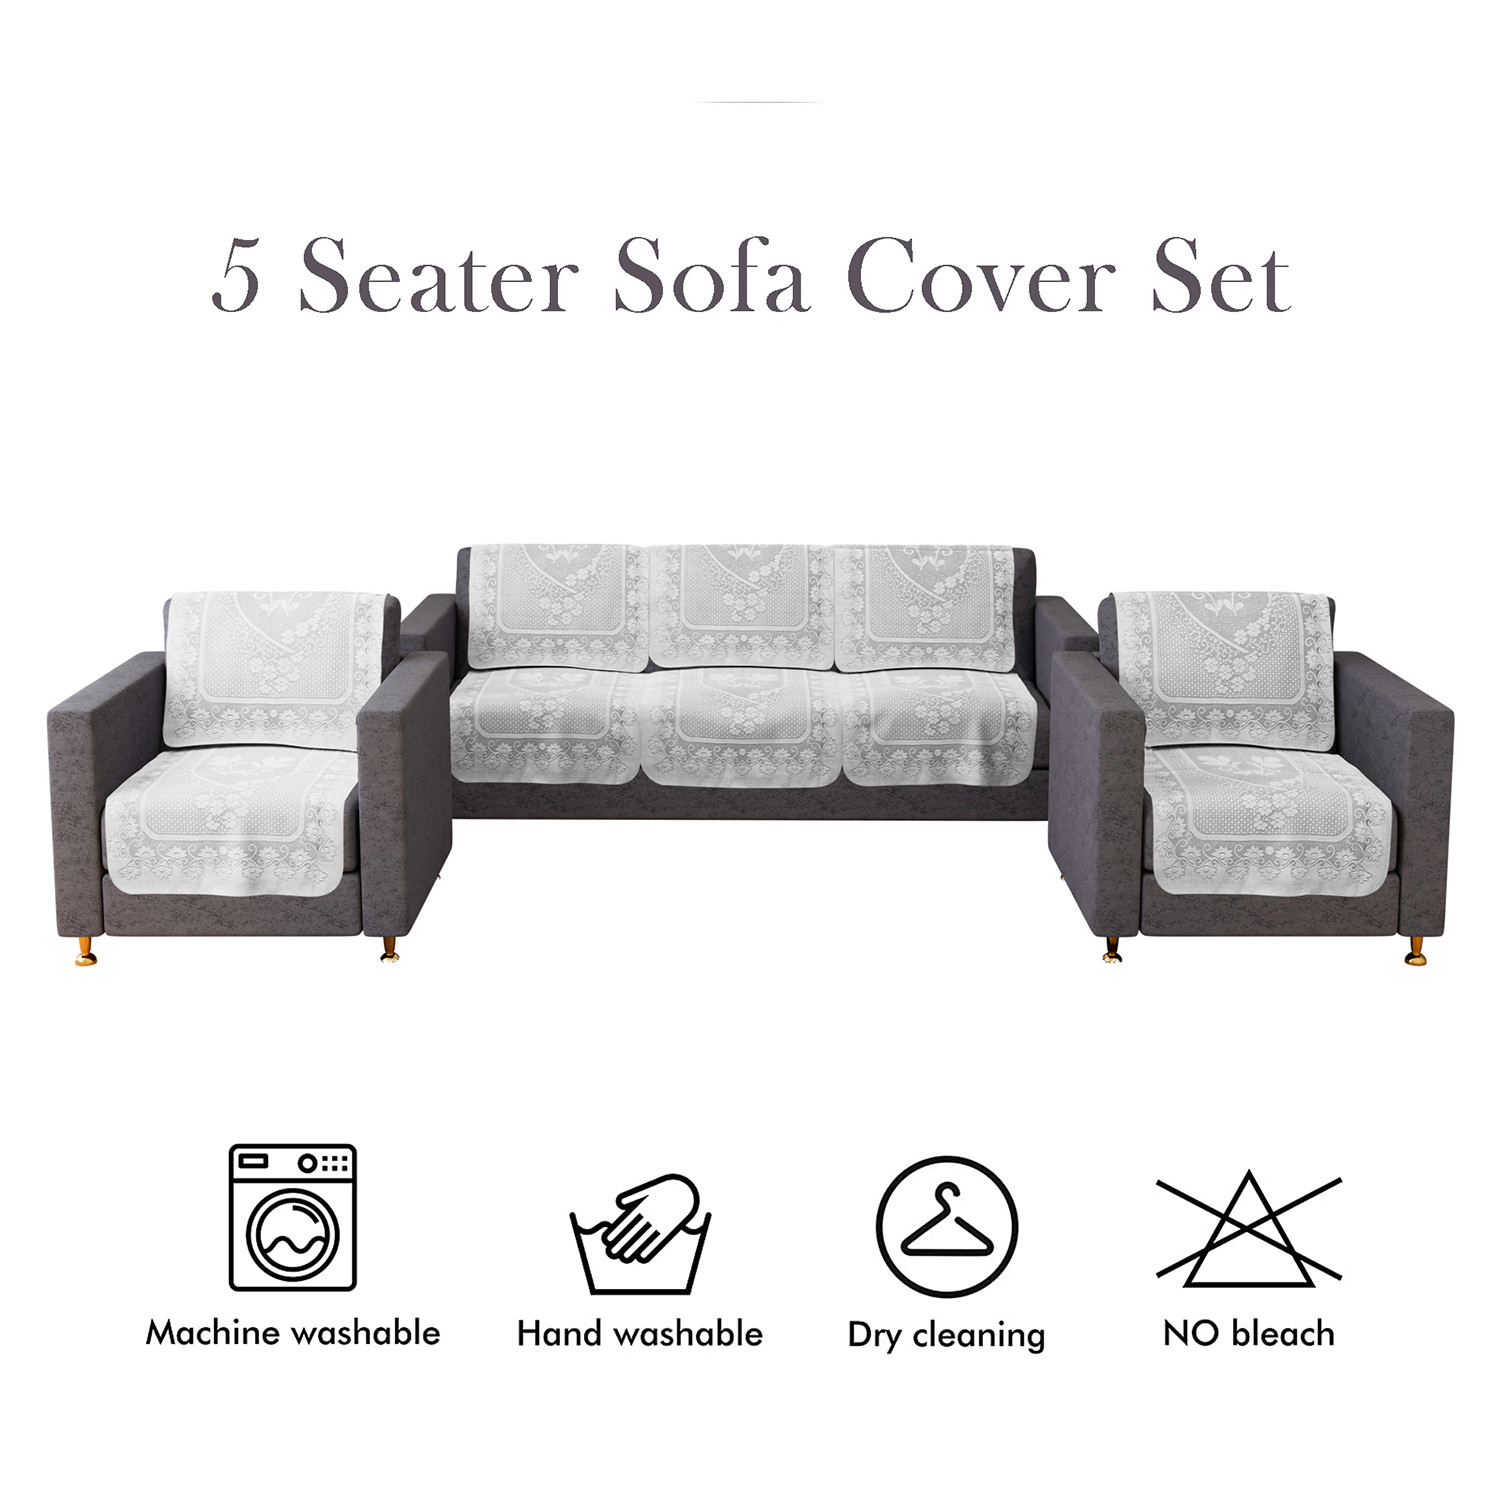 Kuber Industries Sofa Cover | Cotton Net Floral S-19 Design Sofa Cover | 5-Seater Sofa Cover for Home Decor | Sofa cover Set for Living room | White